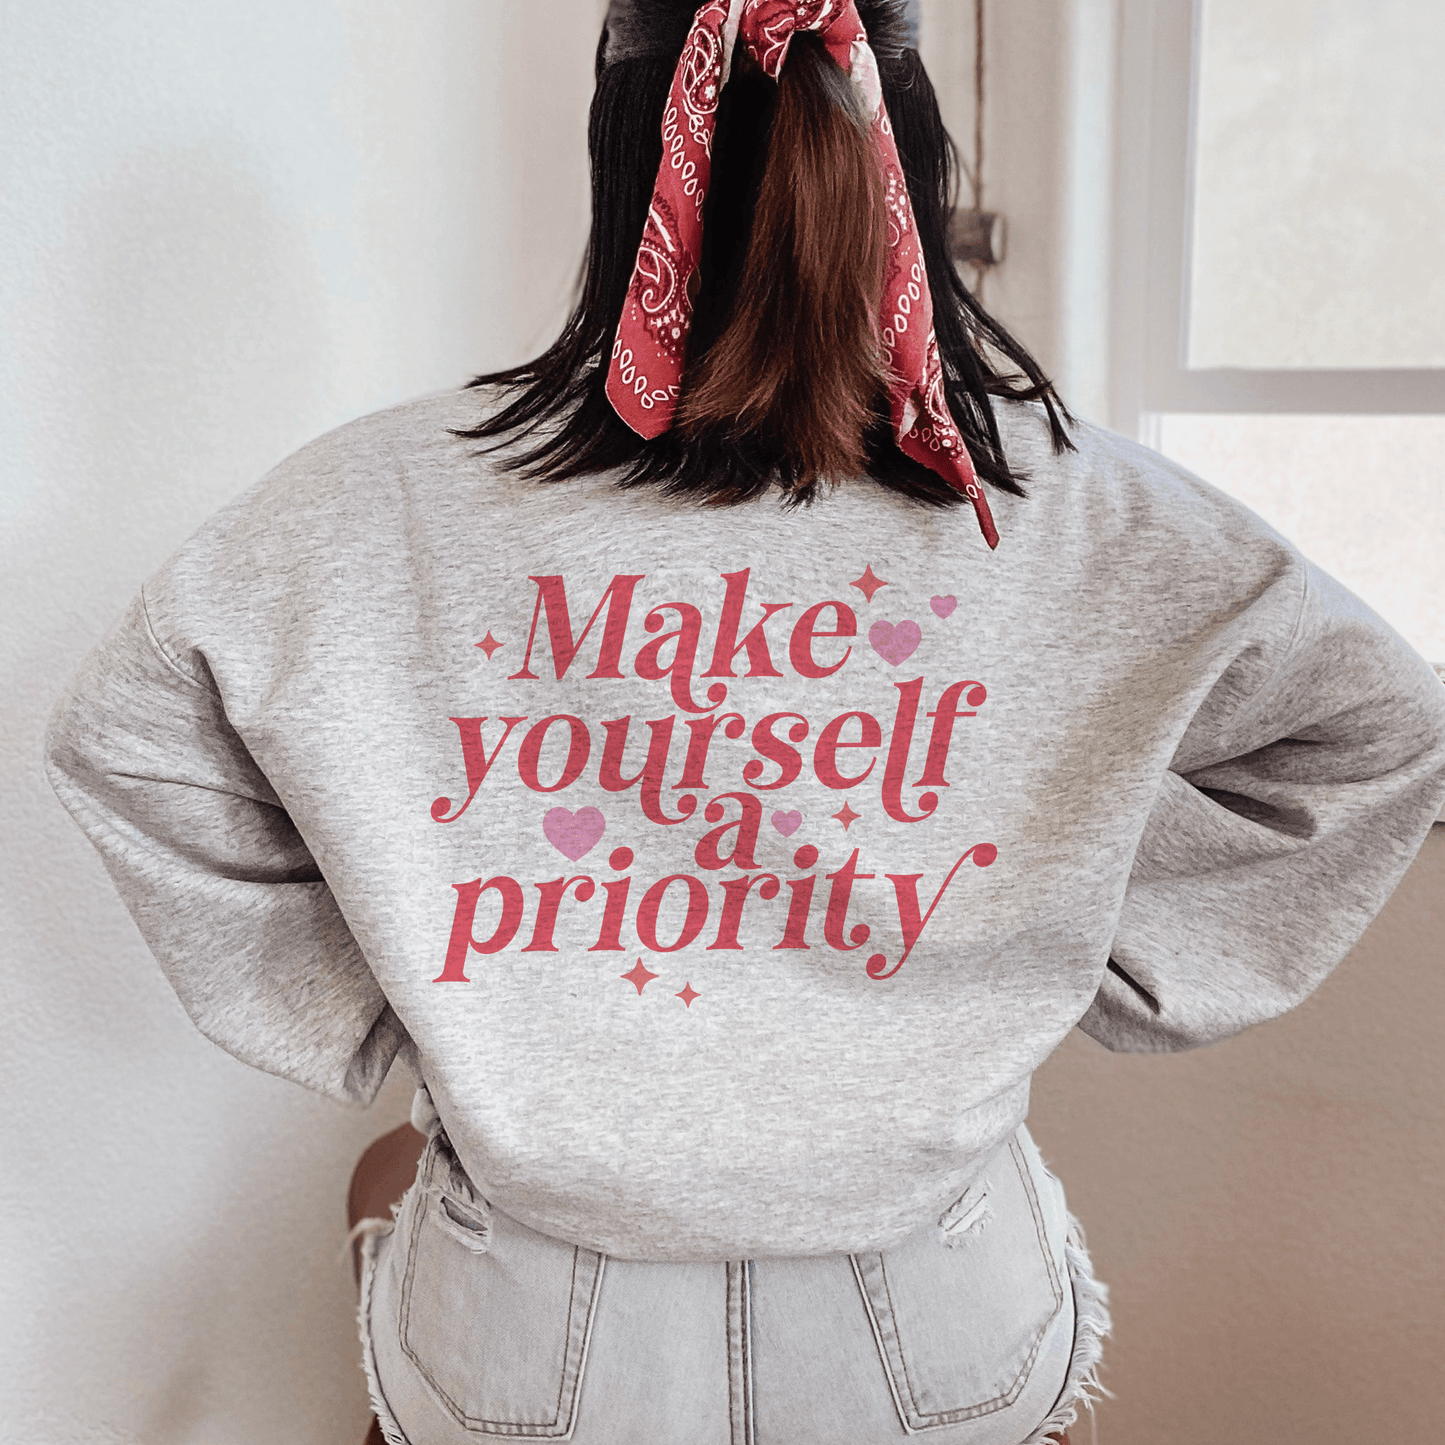 Empowering Self-Care 'Make Yourself a Priority' Sweatshirt